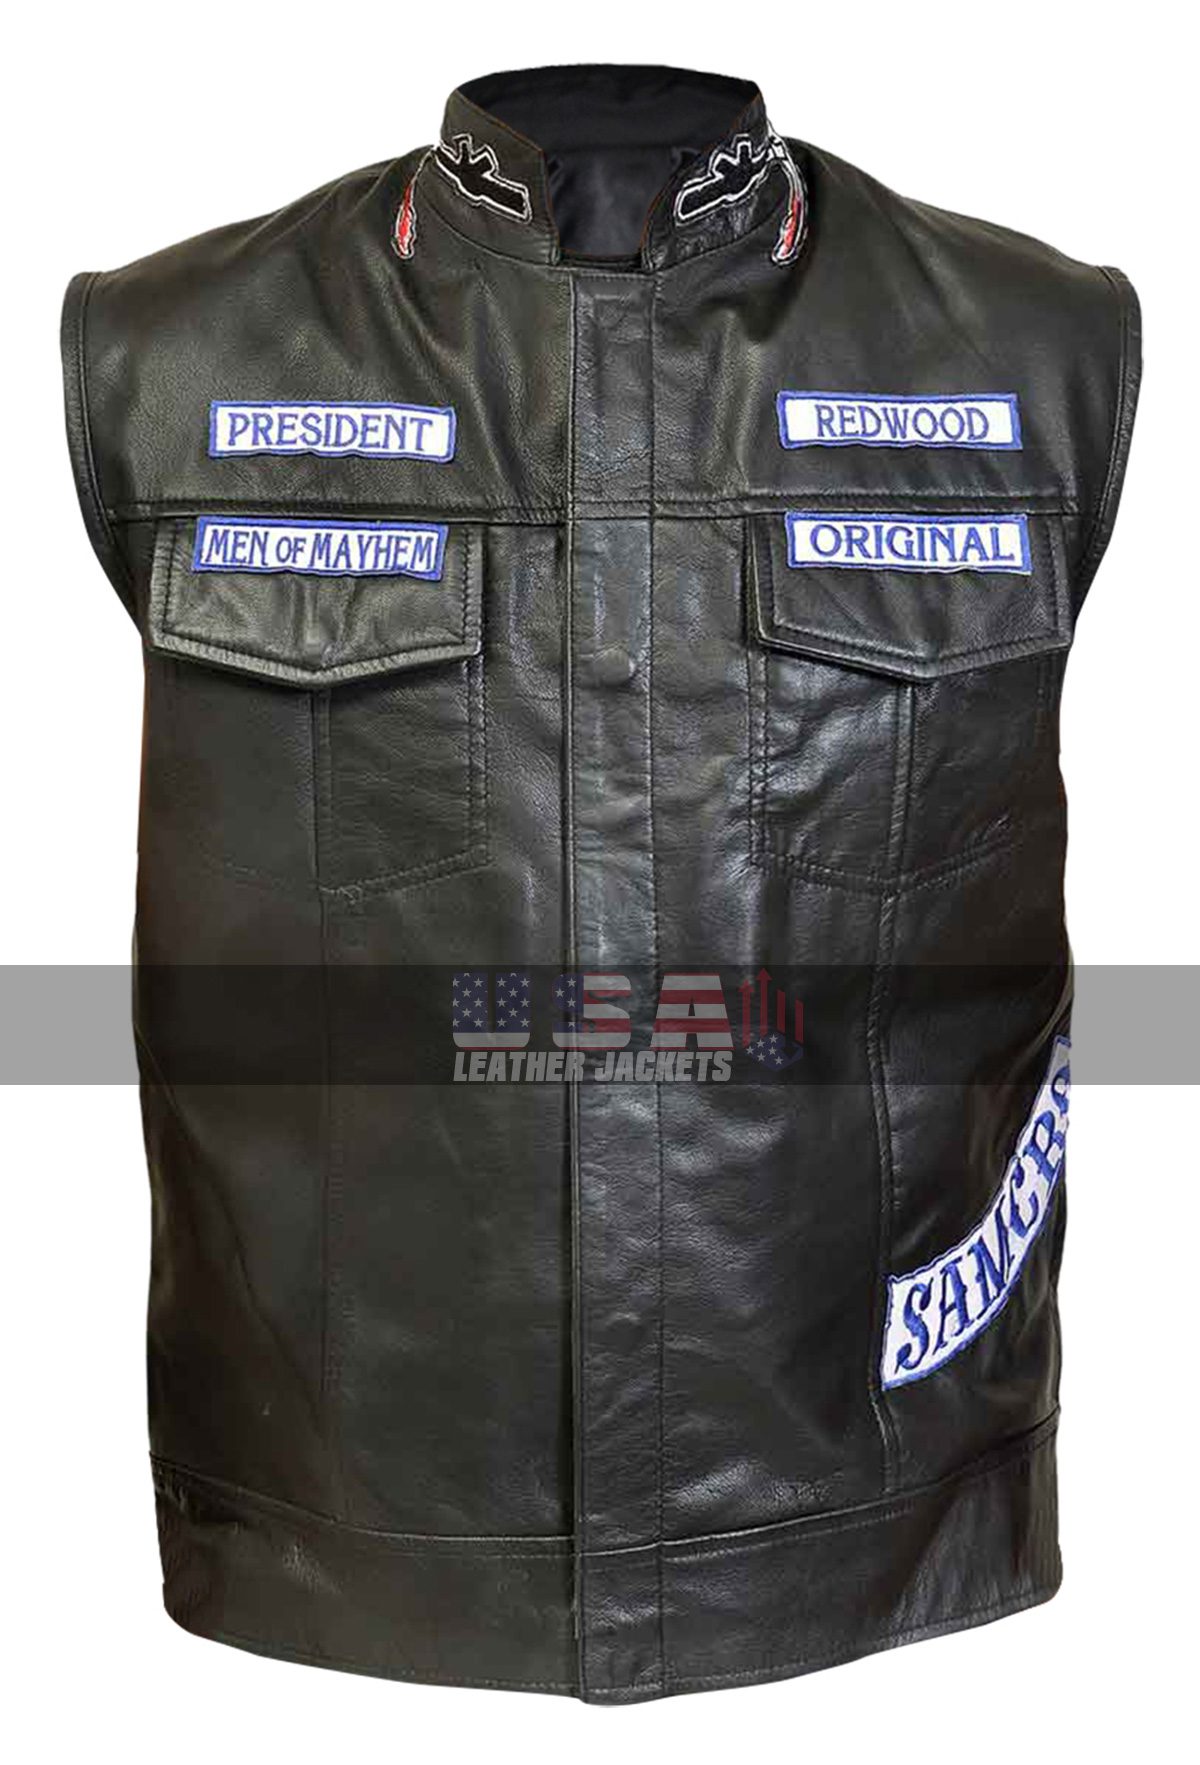 Sons of Anarchy Charlie Hunnam Motorcycle Leather Vest